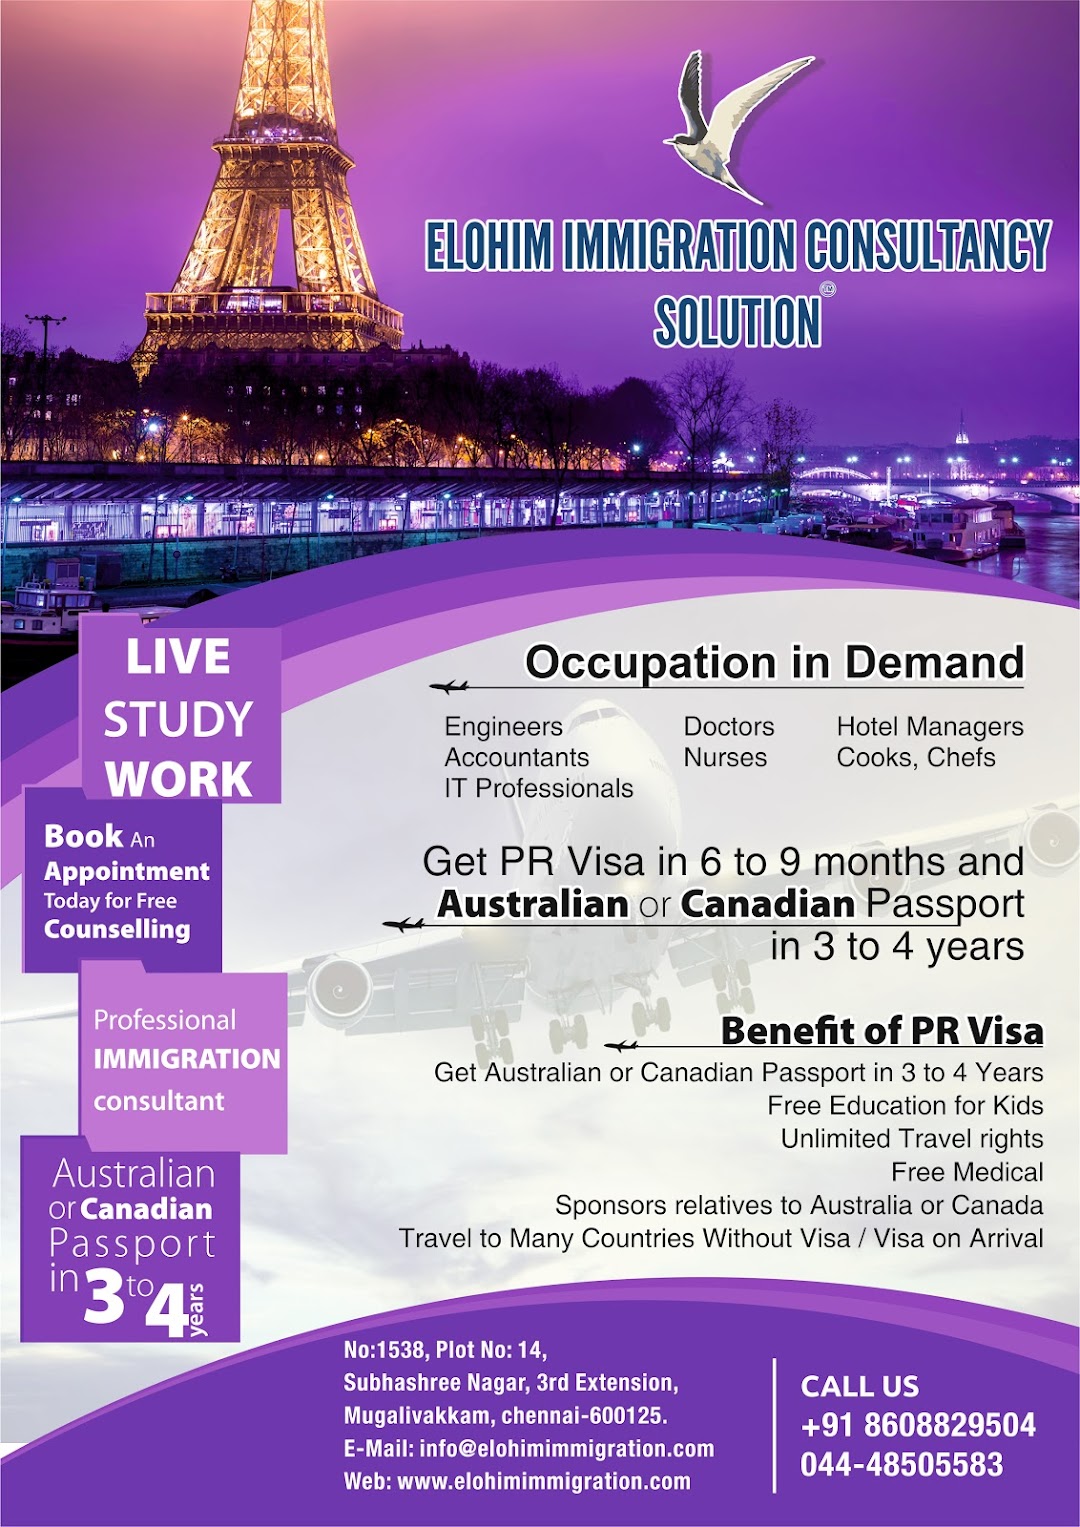 Elohim immigration Consultancy Solution